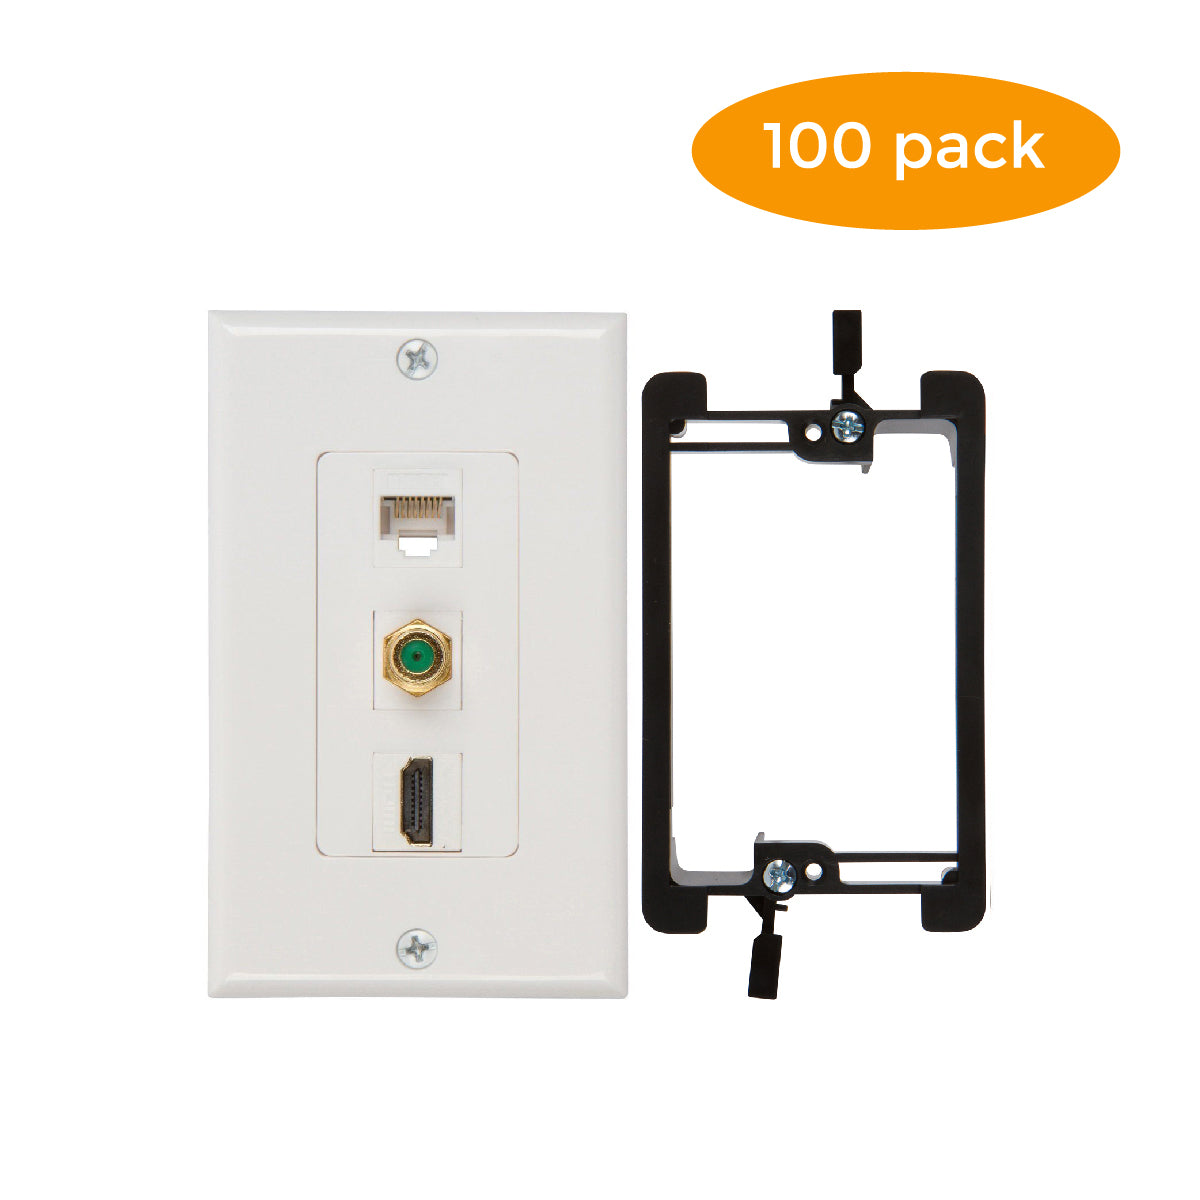 HDMI Coax Ethernet Wall Plate [UL Listed] with Single Gang Low Voltage Mounting Bracket Device (White Kit) - Milena International Inc